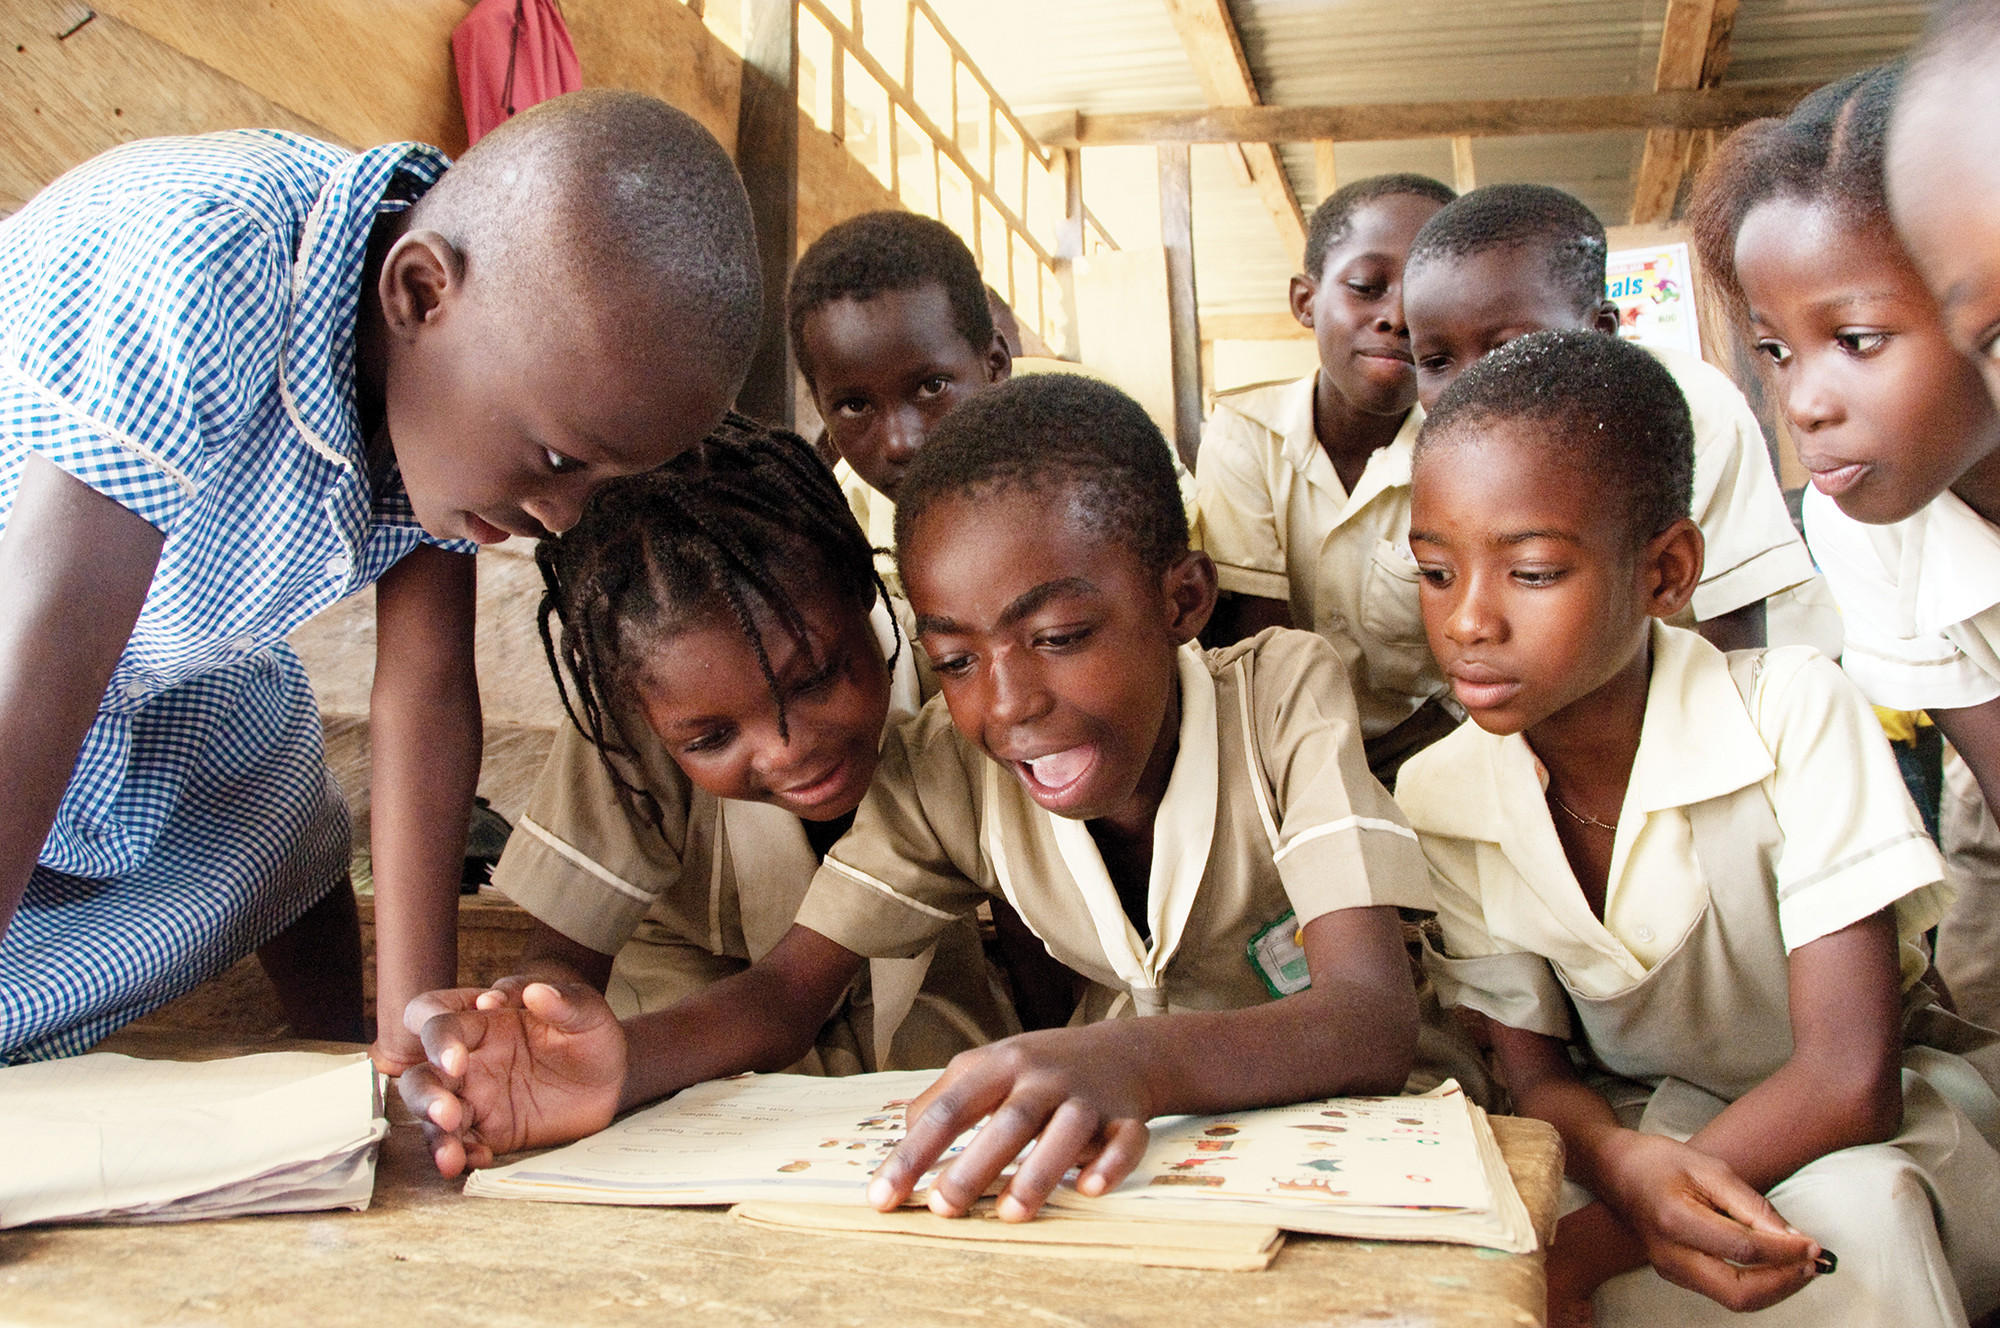 By sending a girl to school, we not only educate the next generation, but we change the world.